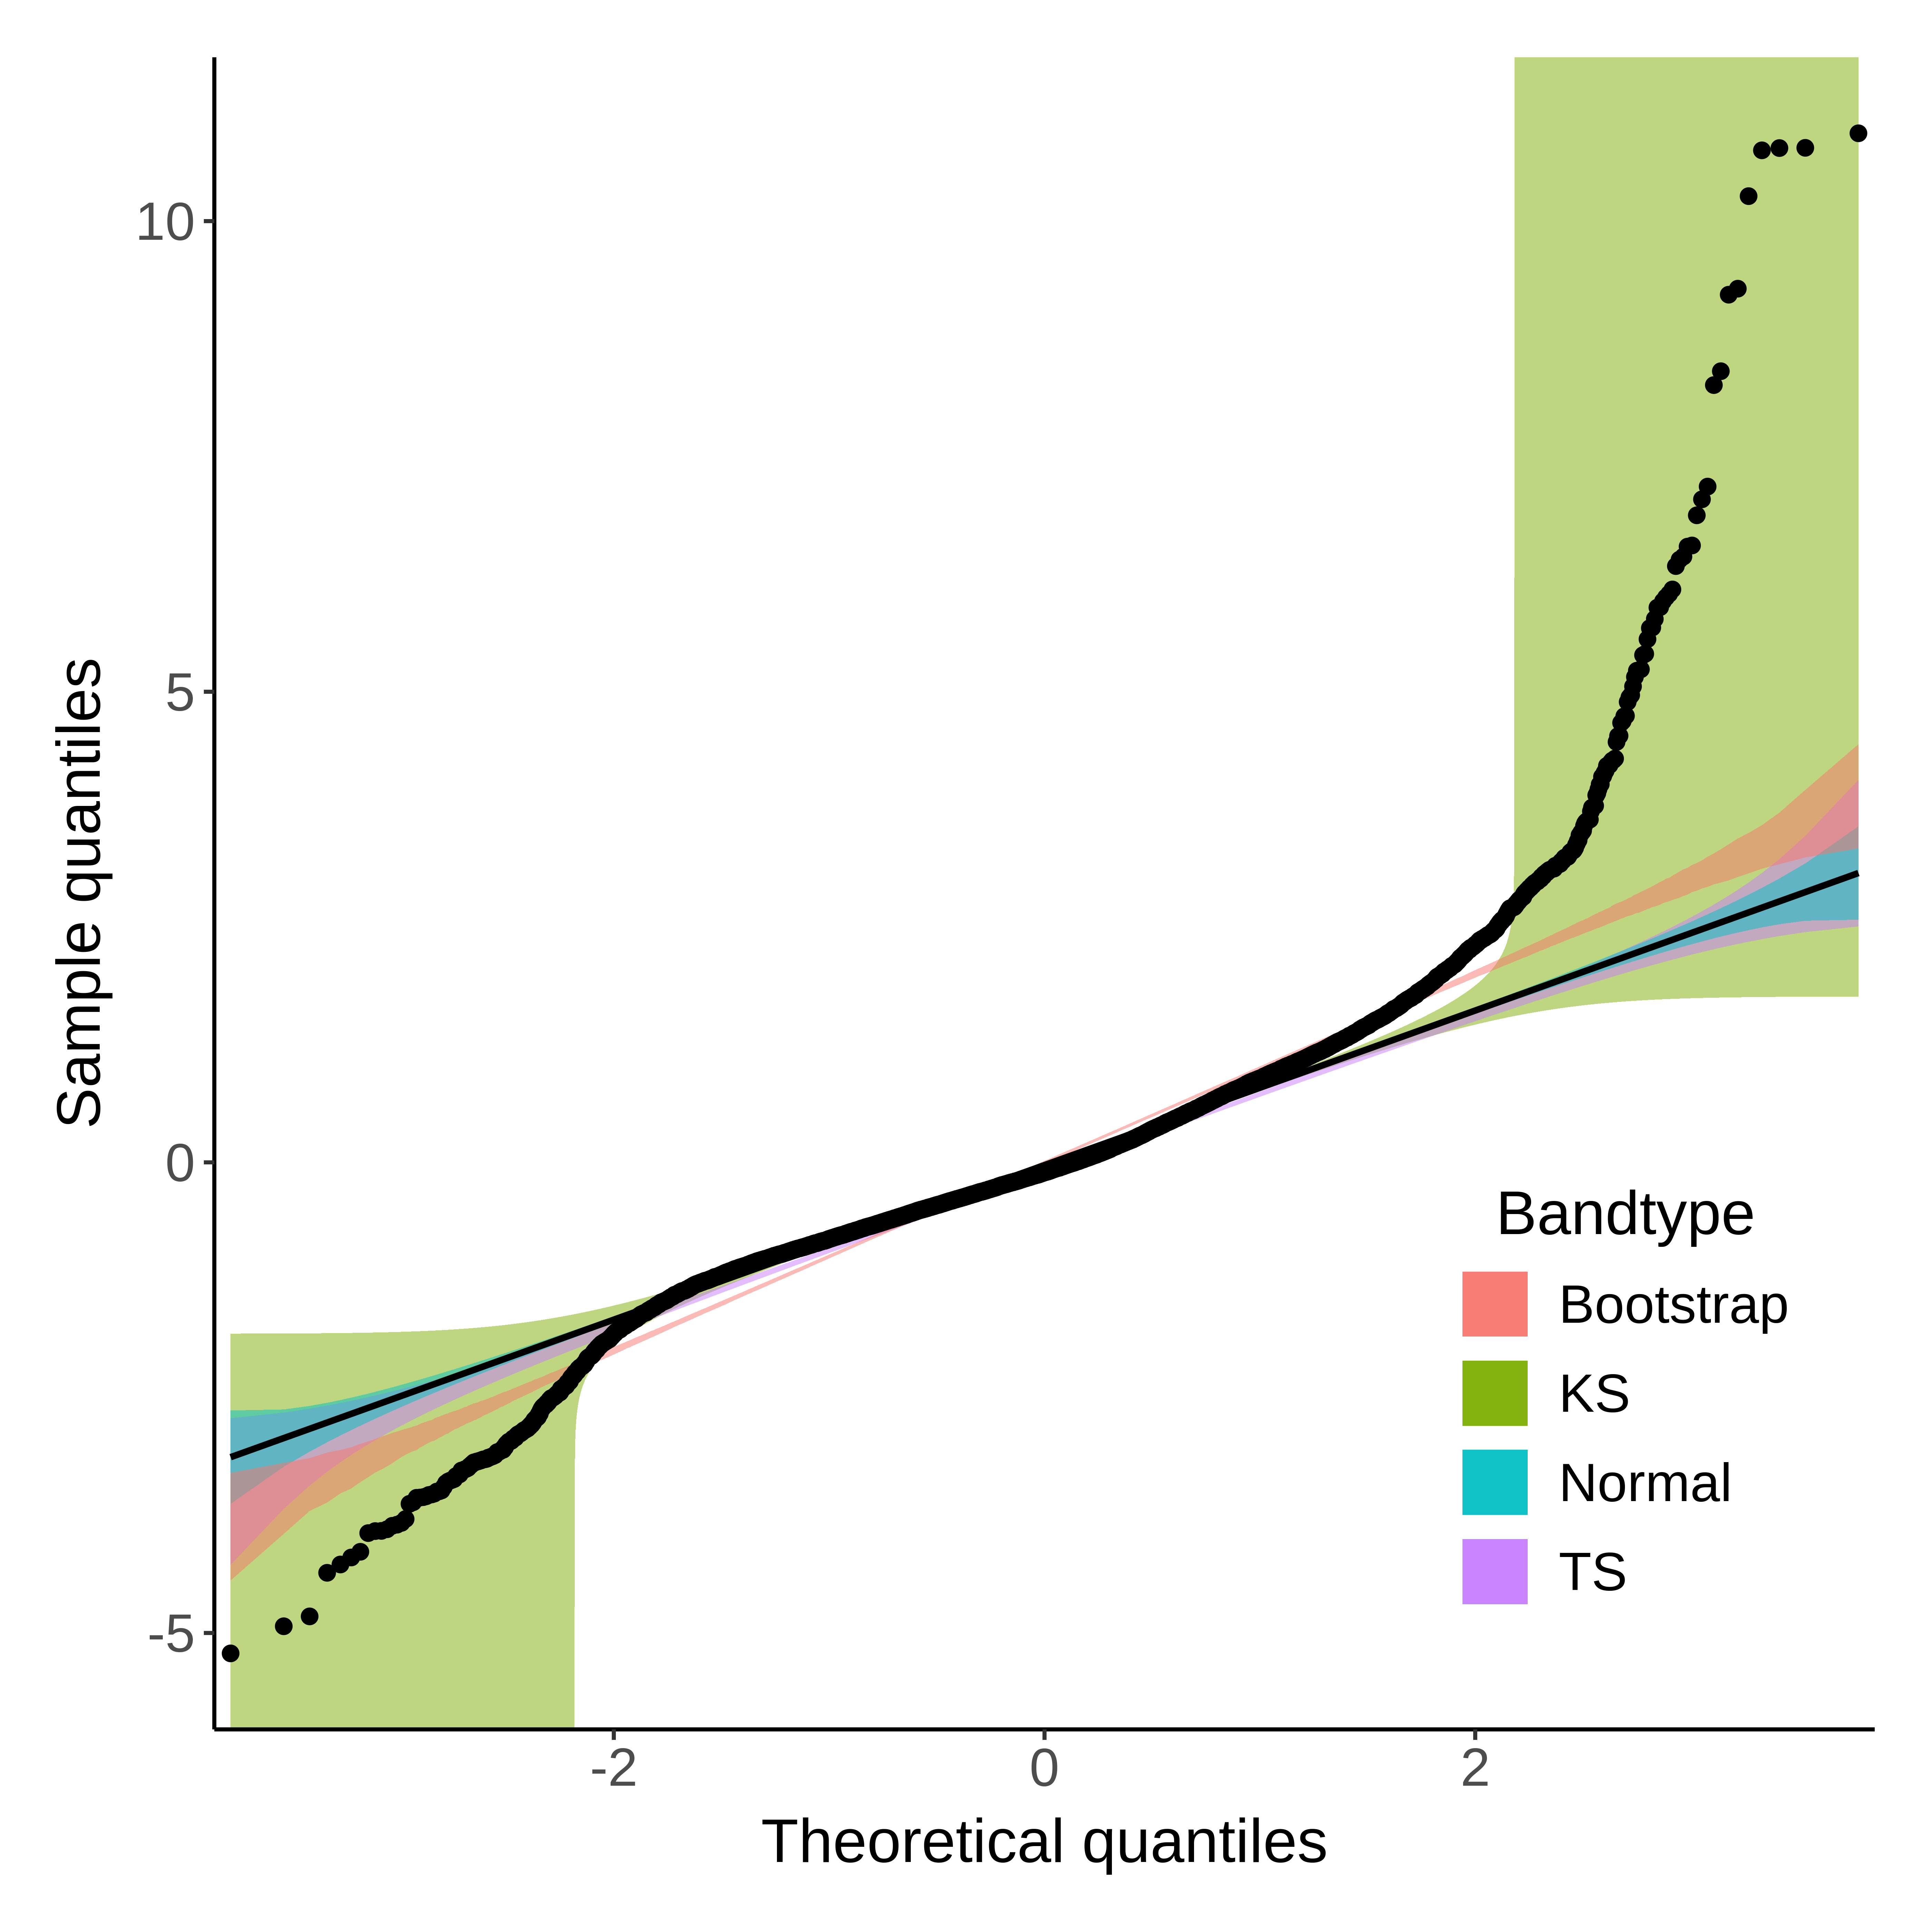 Residuals of the linear mixed-effects model from the lexical decision study. The outliers in the residuals deviate from the coloured areas indicating an acceptable normality. \linebreak KS = Kolmogorov-Smirnov test; TS = tail-sensitive confidence bands.